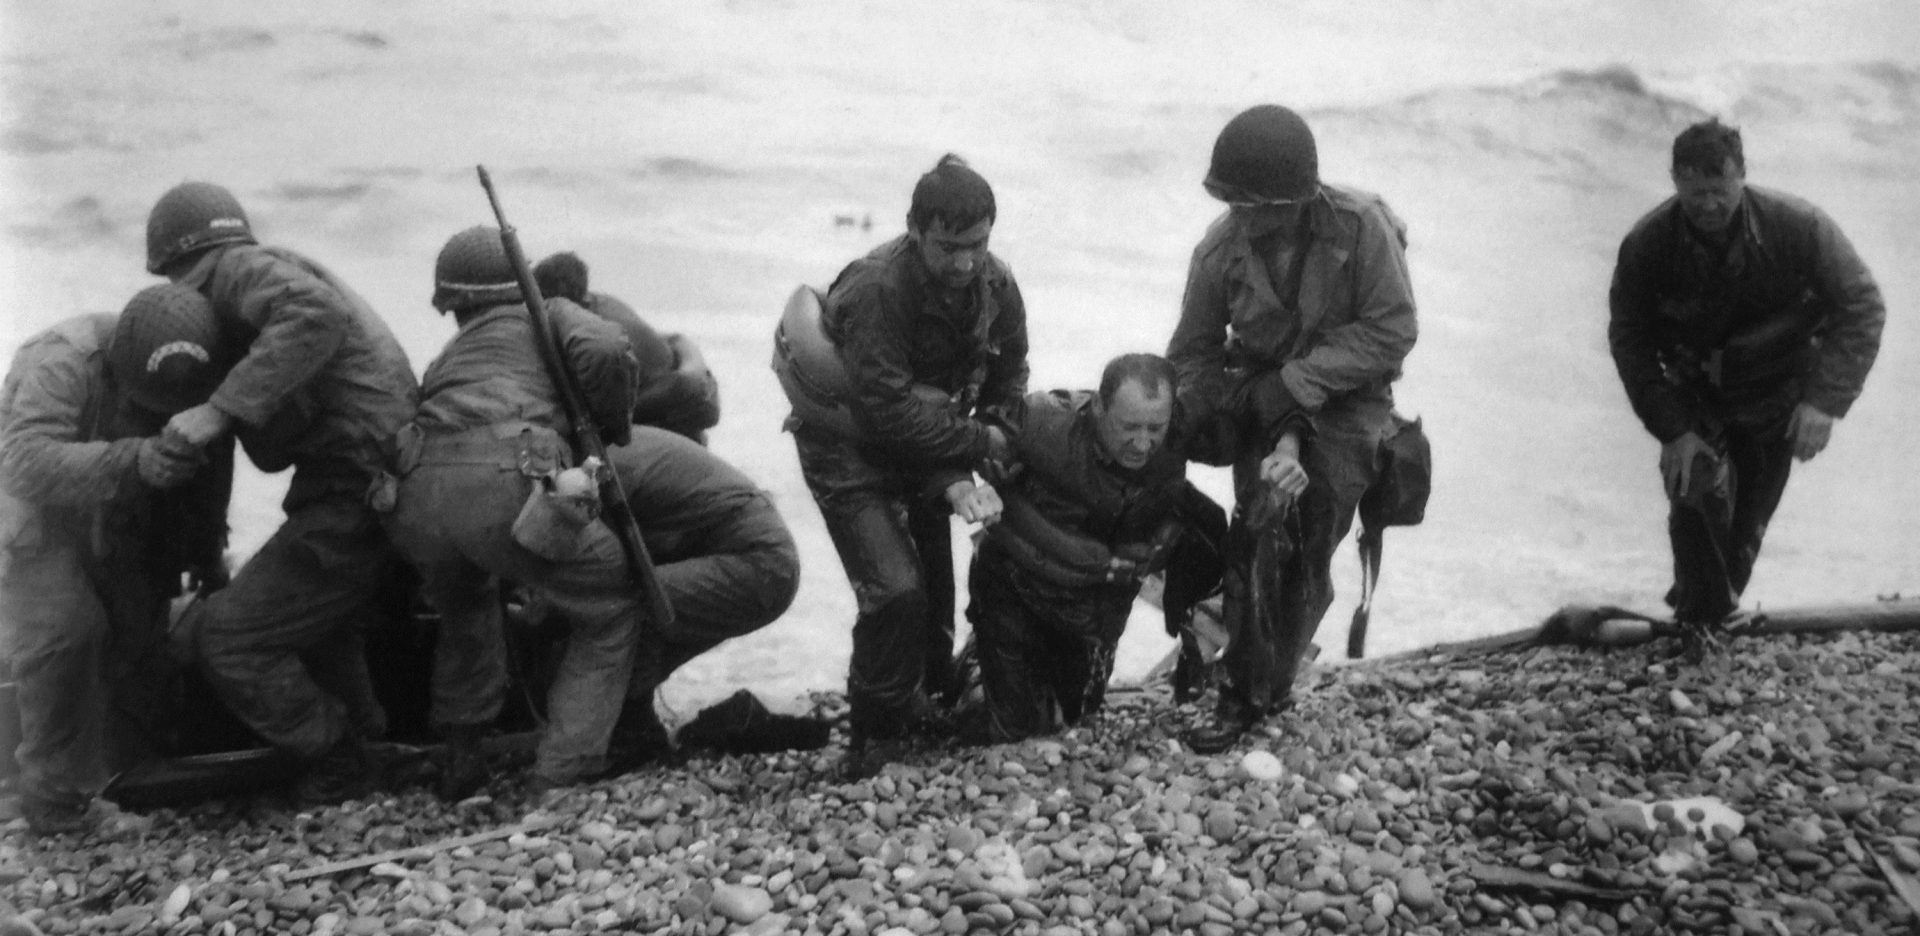 Members of an American landing unit help their exhausted comrades ashore during the Normandy invasion on June 7, 1944. Nick Russin is pictured in the center being dragged onto shore.